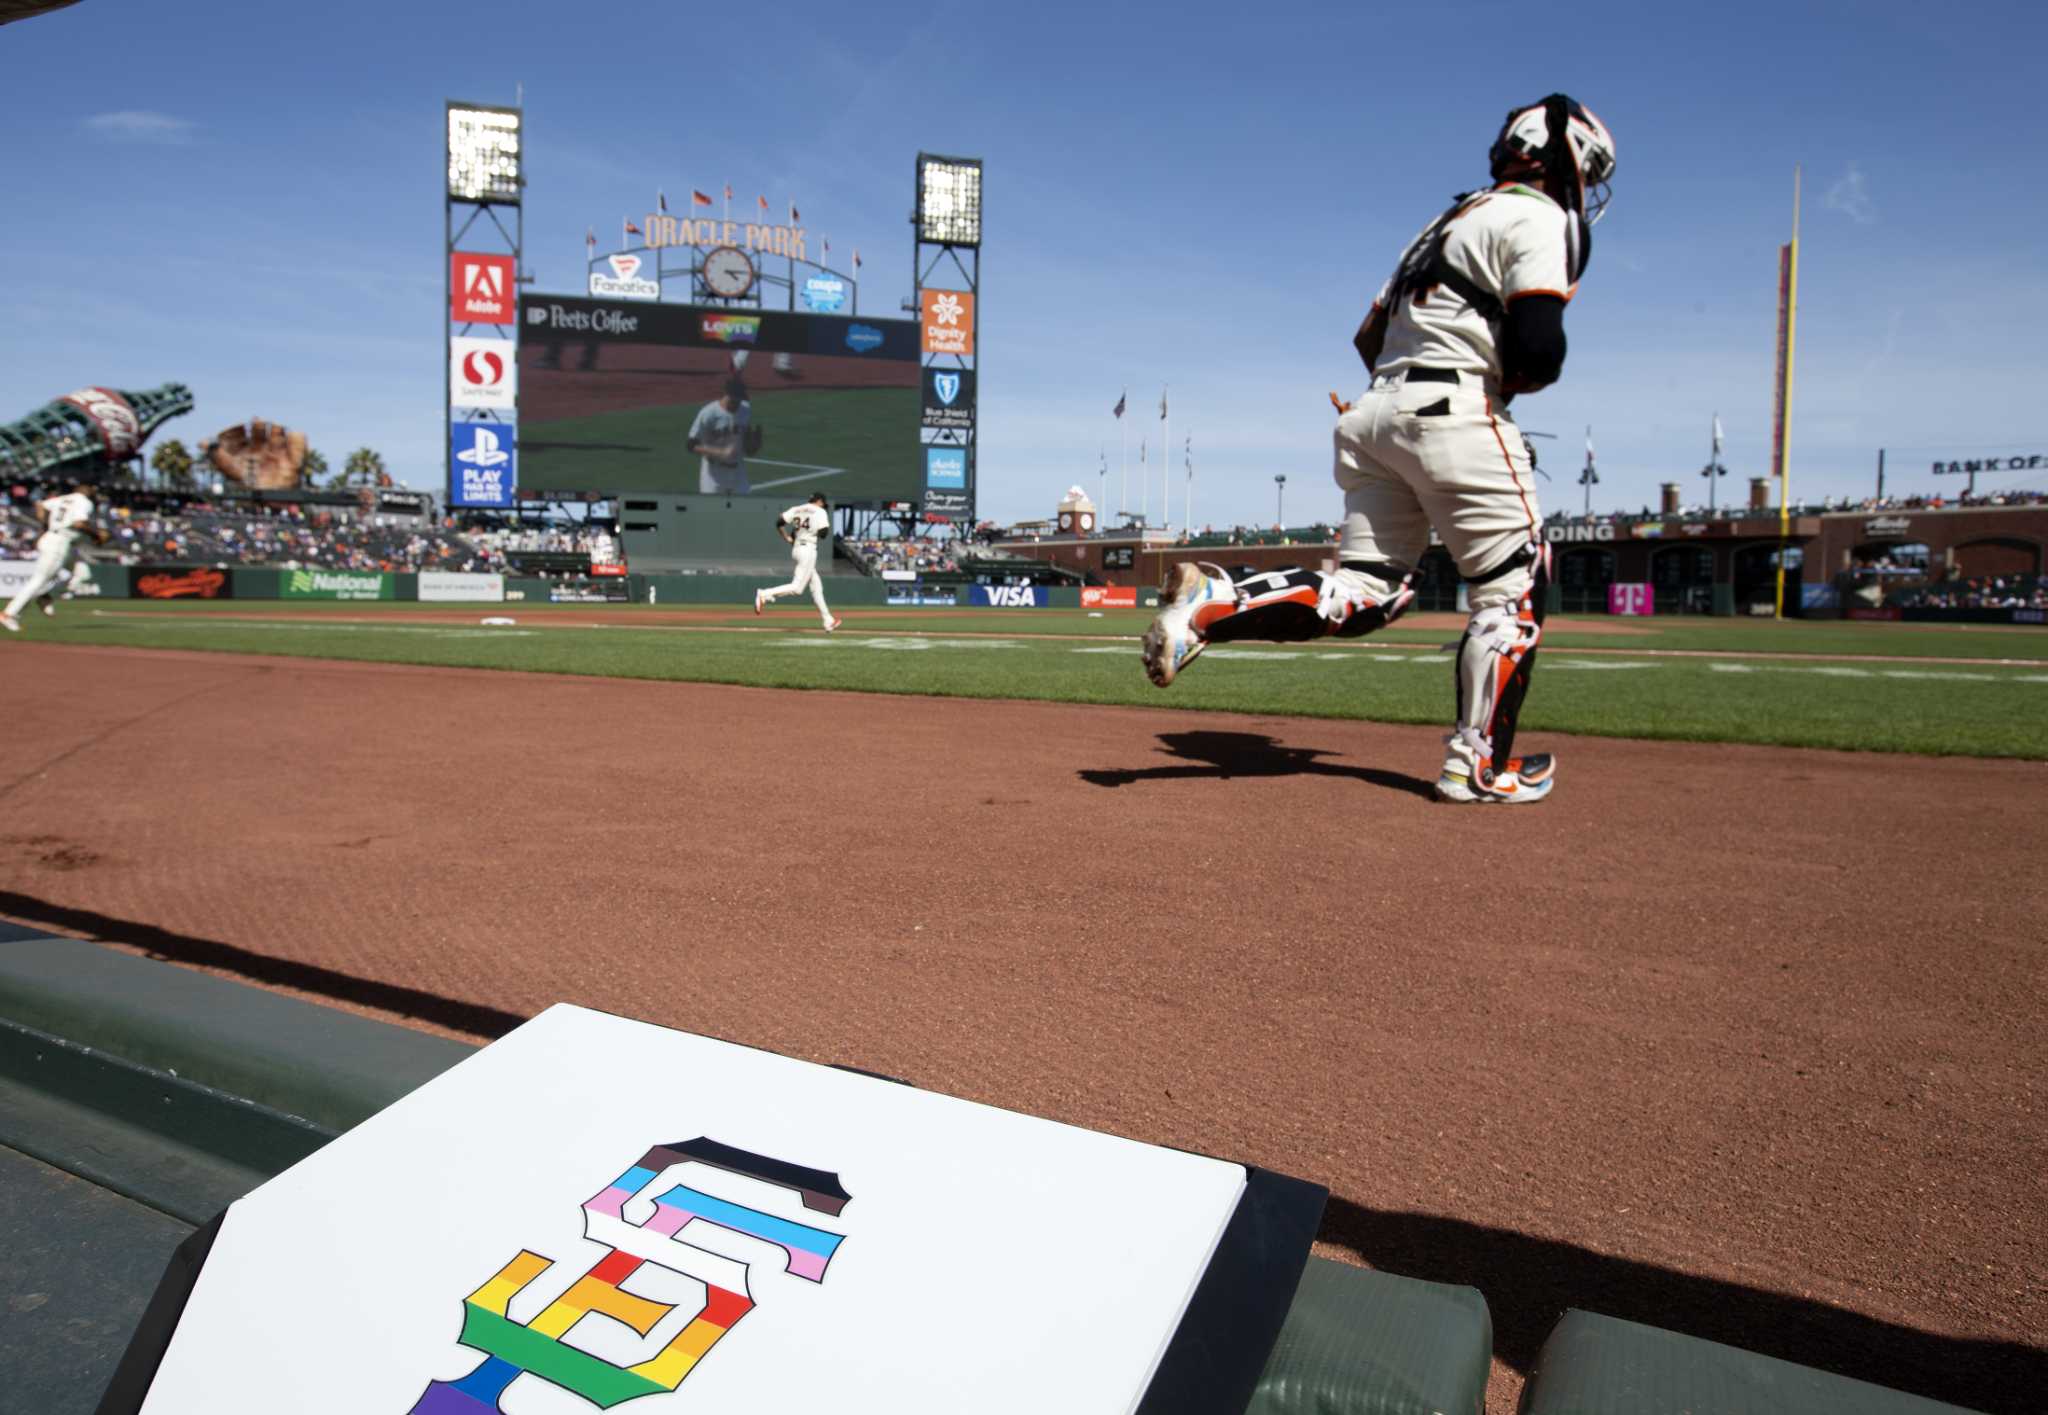 MLB players say drag troupe invited to Dodgers' Pride Night mocks